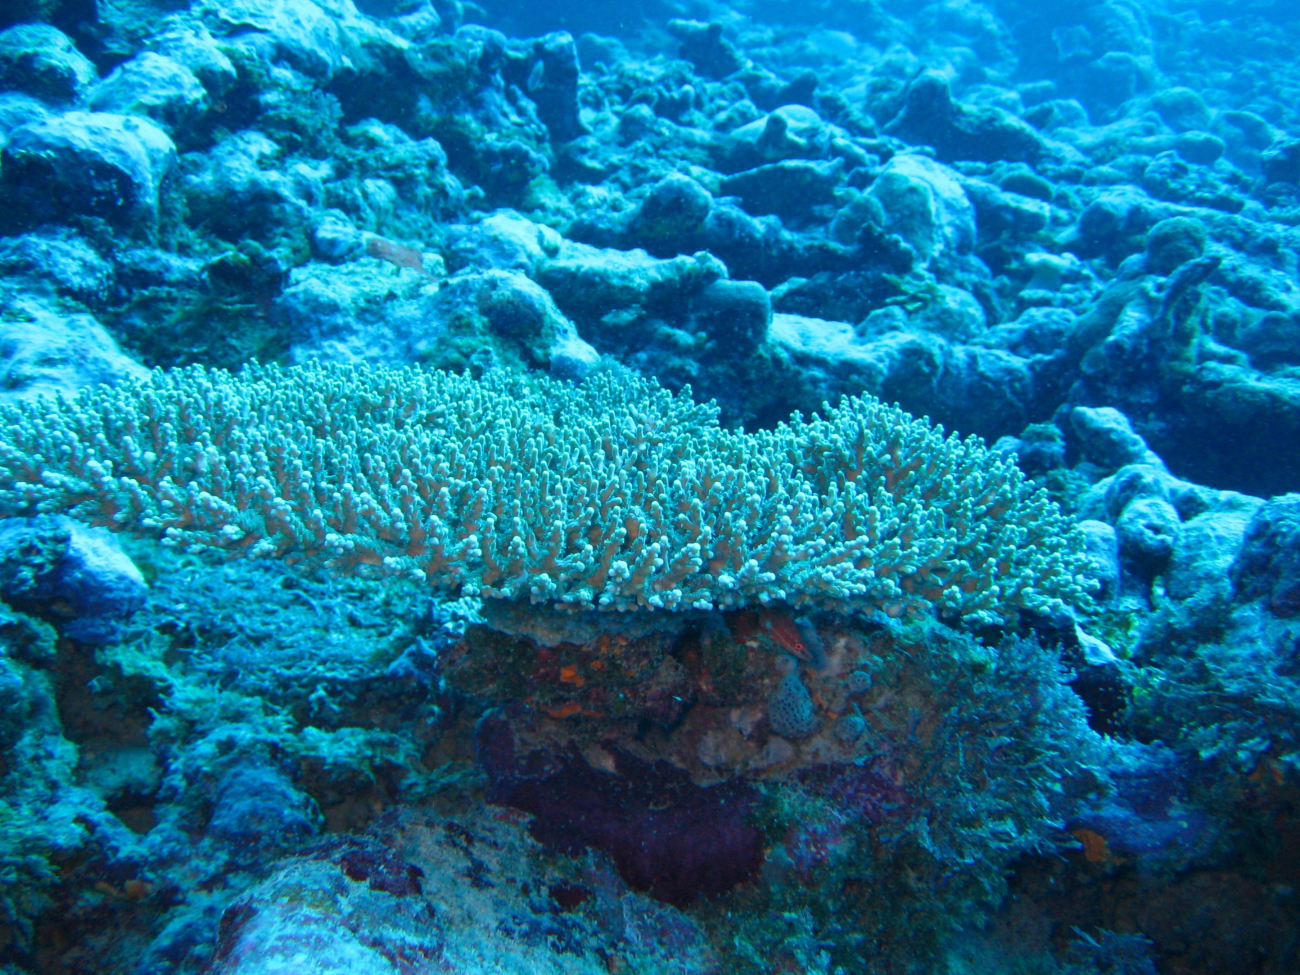 Coral (Acropora pulchra) in an area of relatively bare bottom